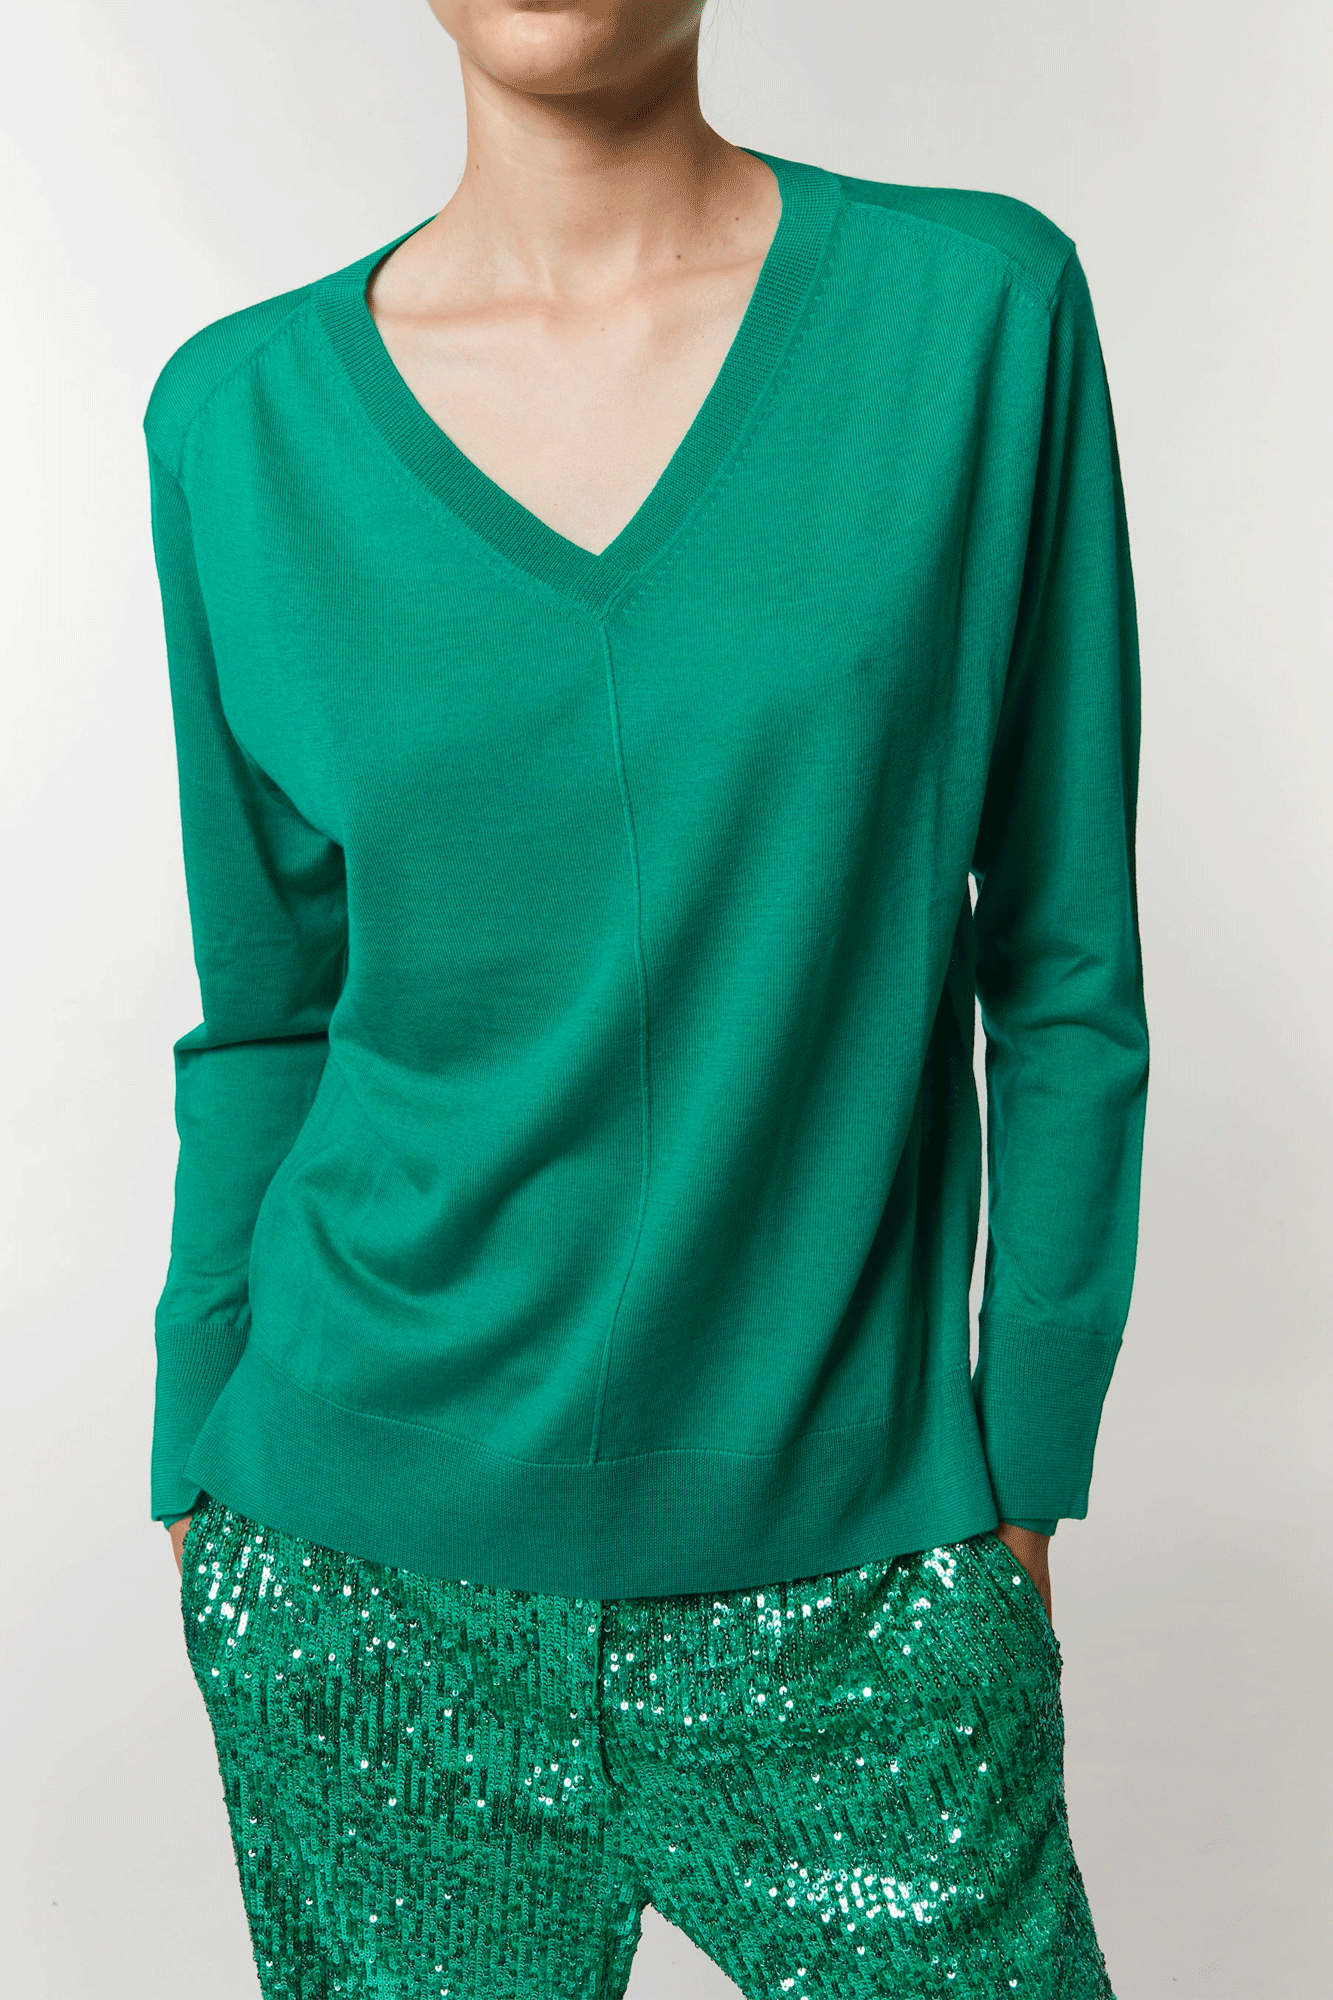 Our Bayley V-Neck Sweater from Saint Art is crafted with 100% fine merino wool for a luxurious and sophisticated look. Available in emerald green, this sweater will bring comfort and style to any outfit. Experience superior quality and timeless craftsmanship with this classic piece.